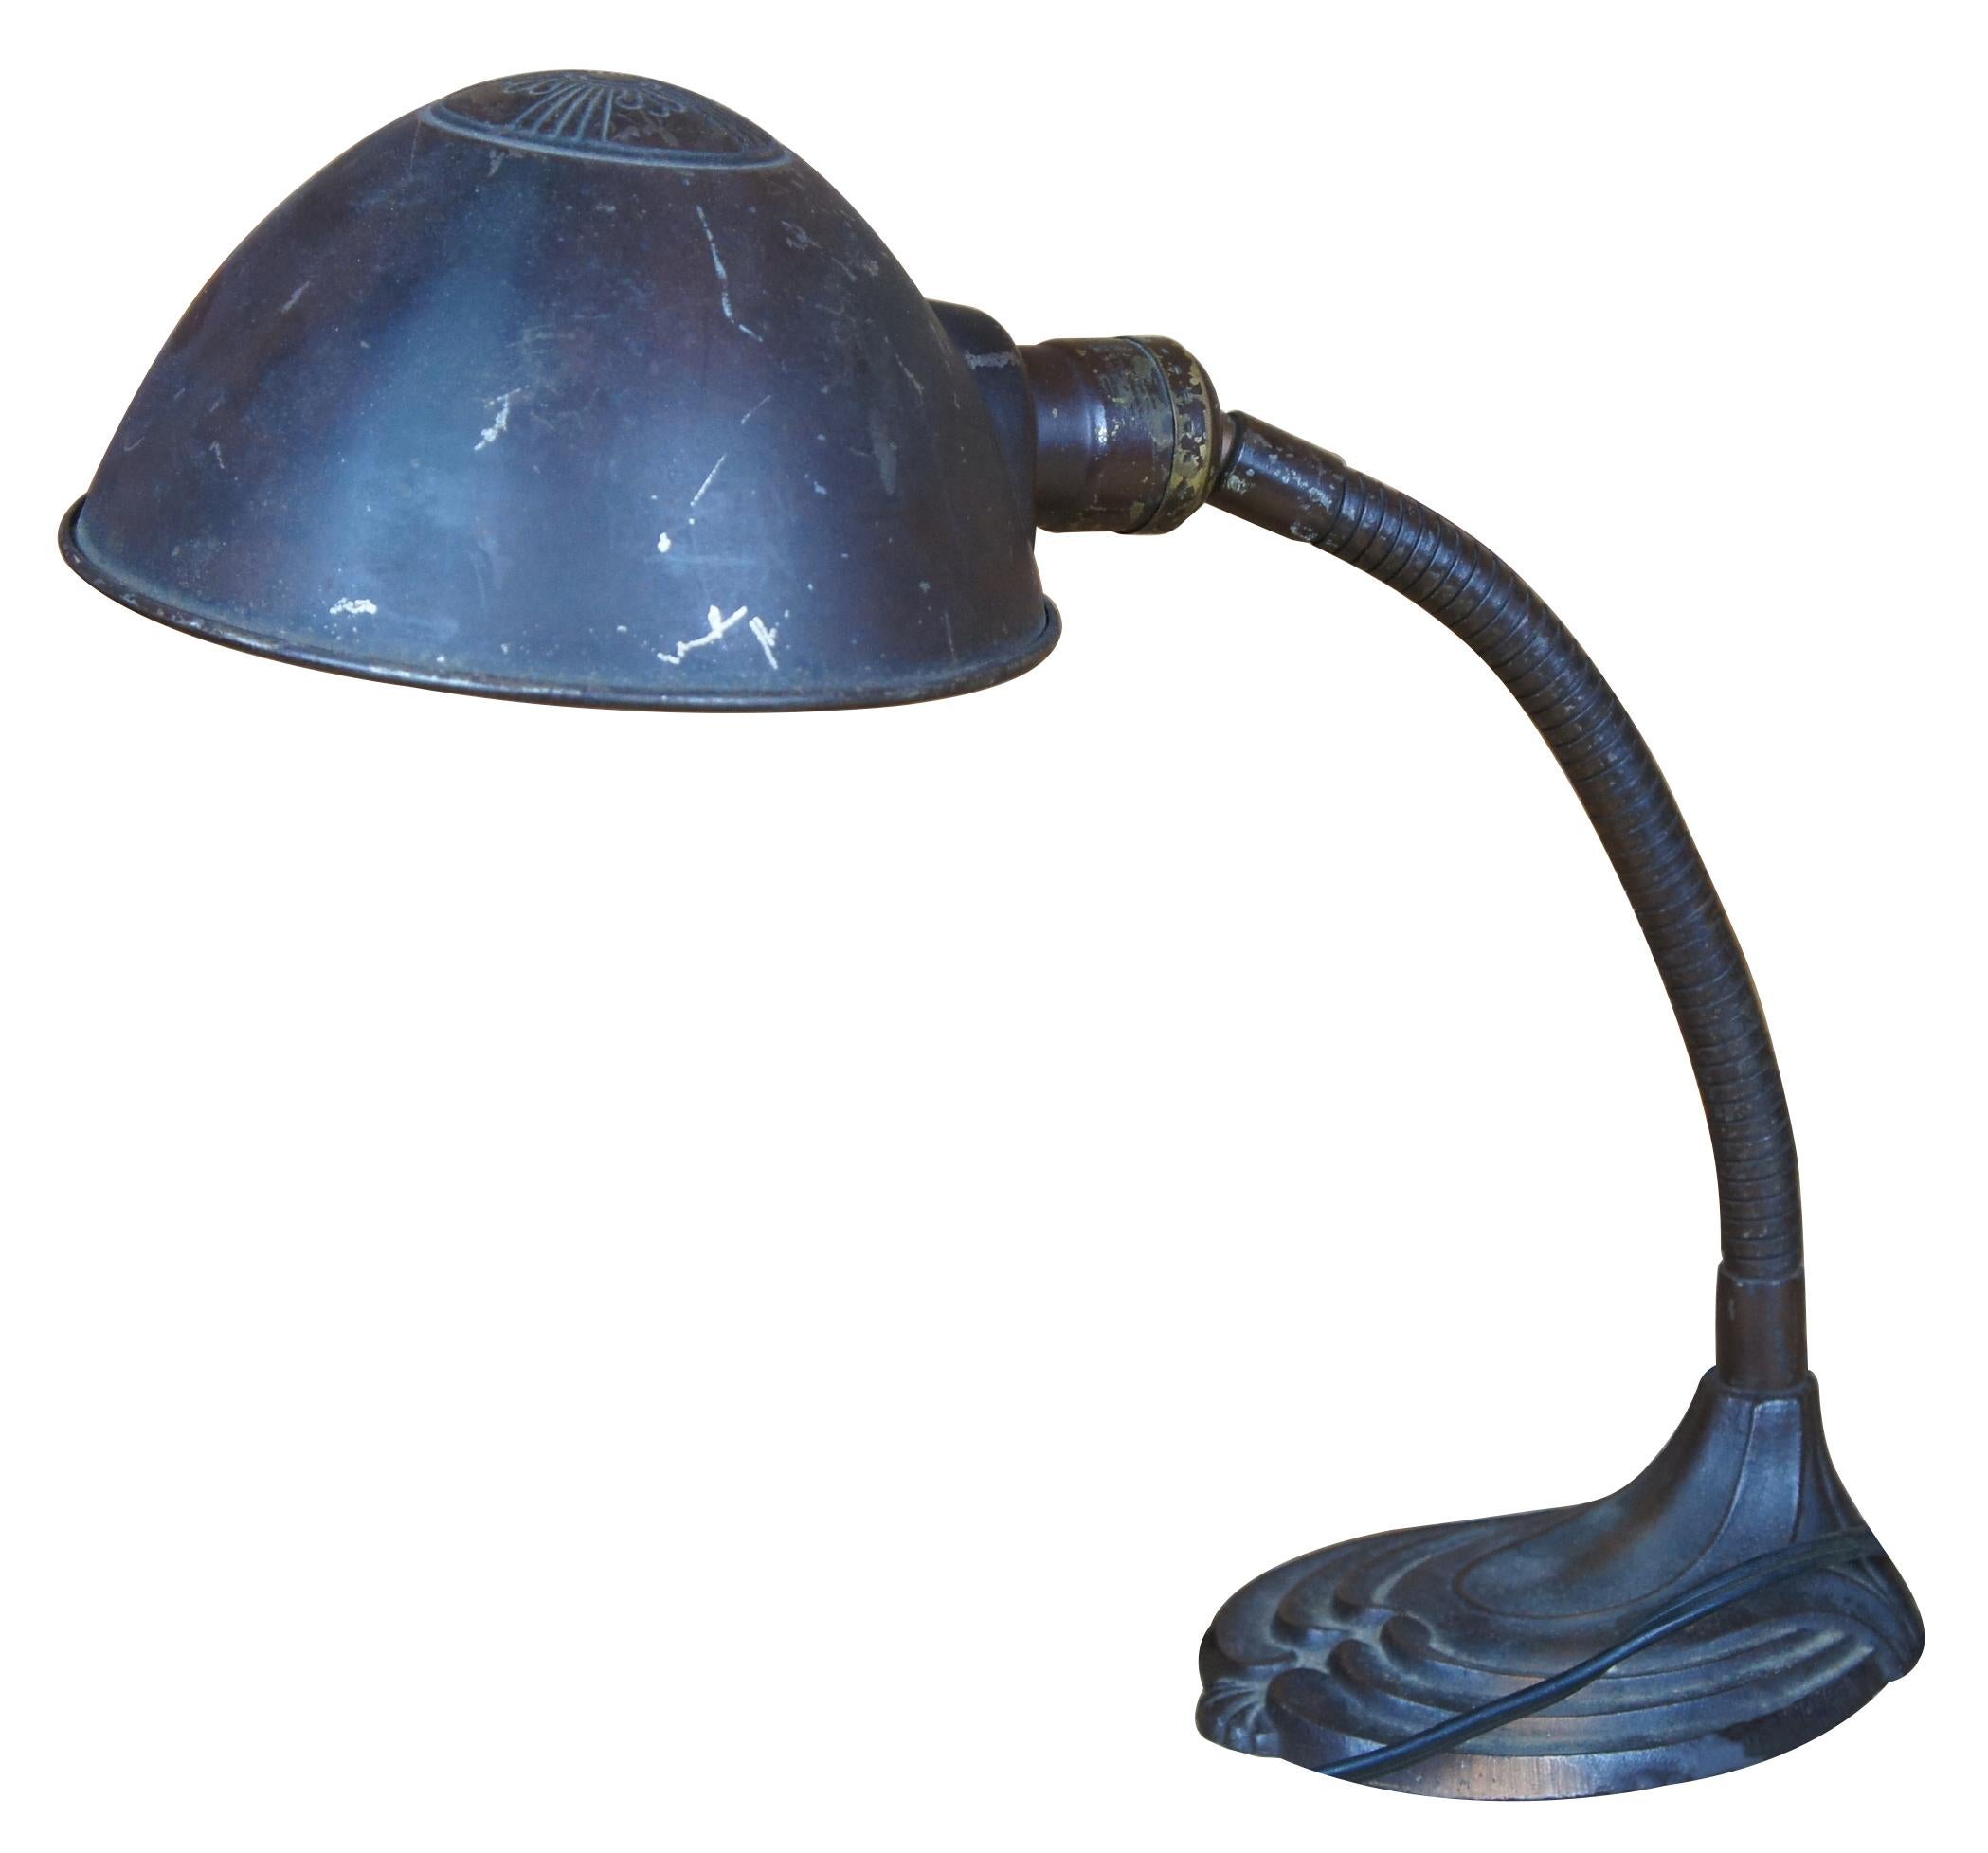 Antique Art Deco desk or table lamp featuring articulating gooseneck and iron base.
 